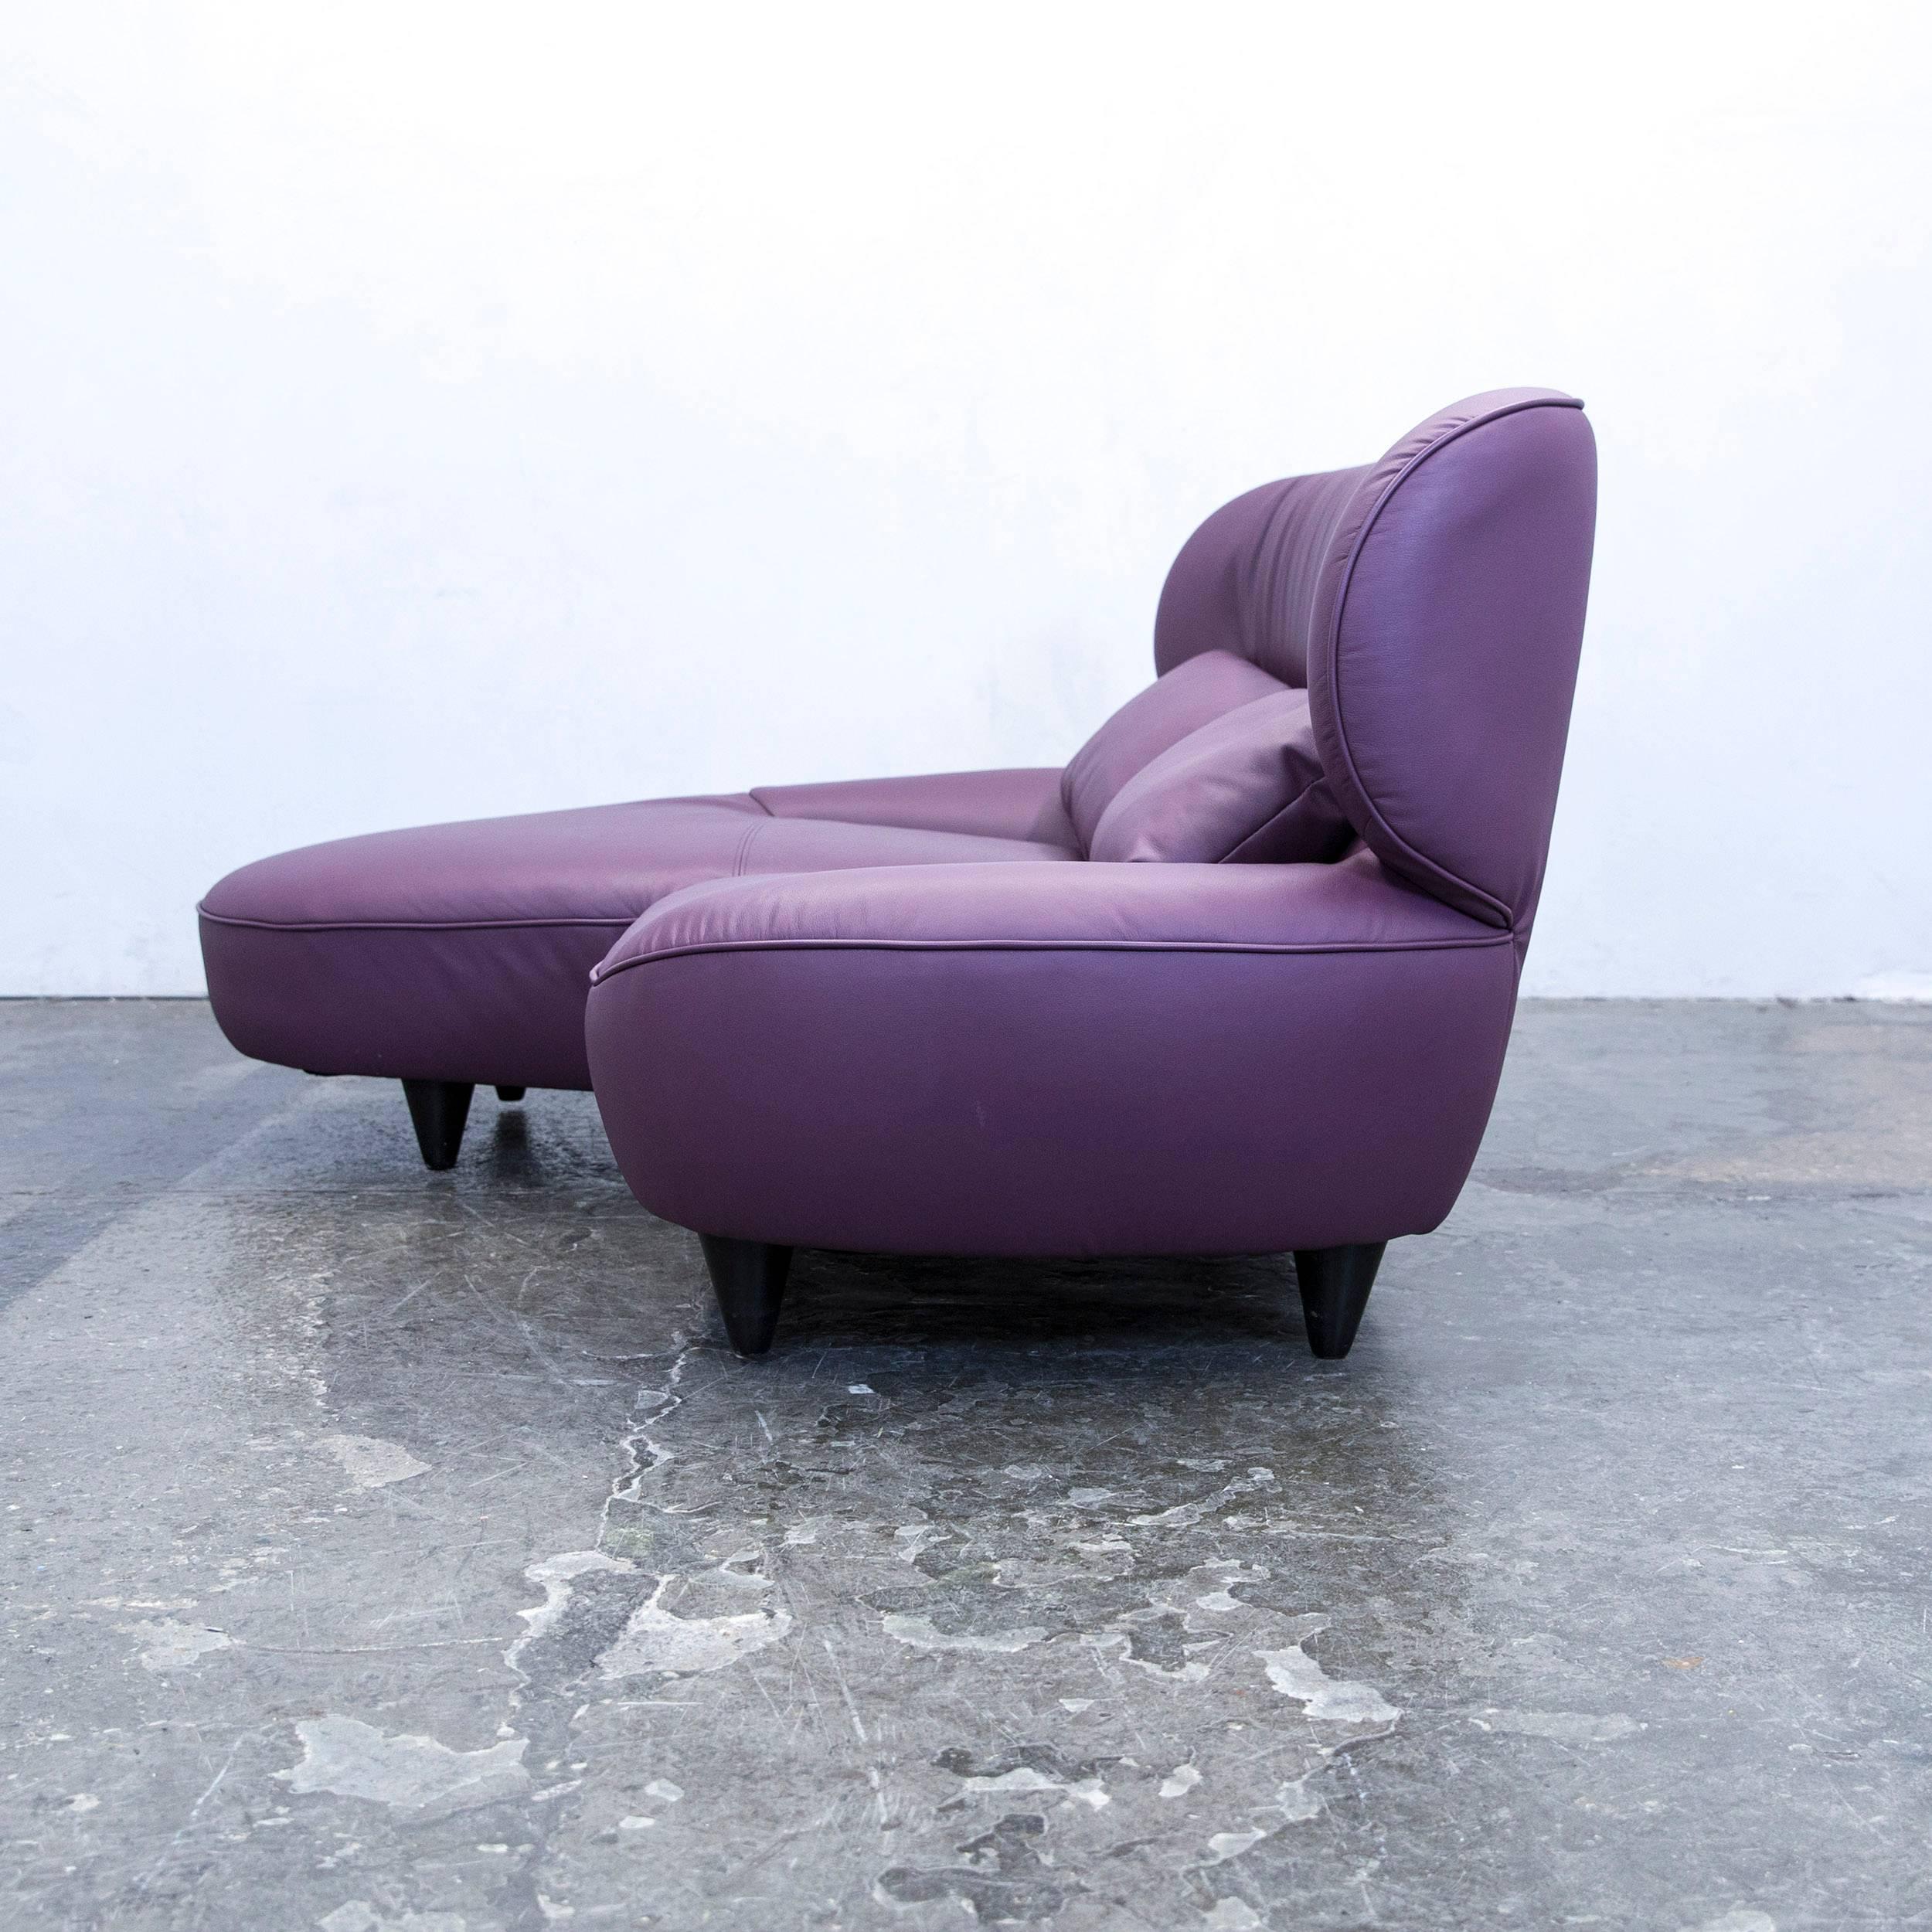 Designer Corner Sofa Set Footstool Lilac Two-Seat Couch Modern Faux Leather In Good Condition For Sale In Cologne, DE